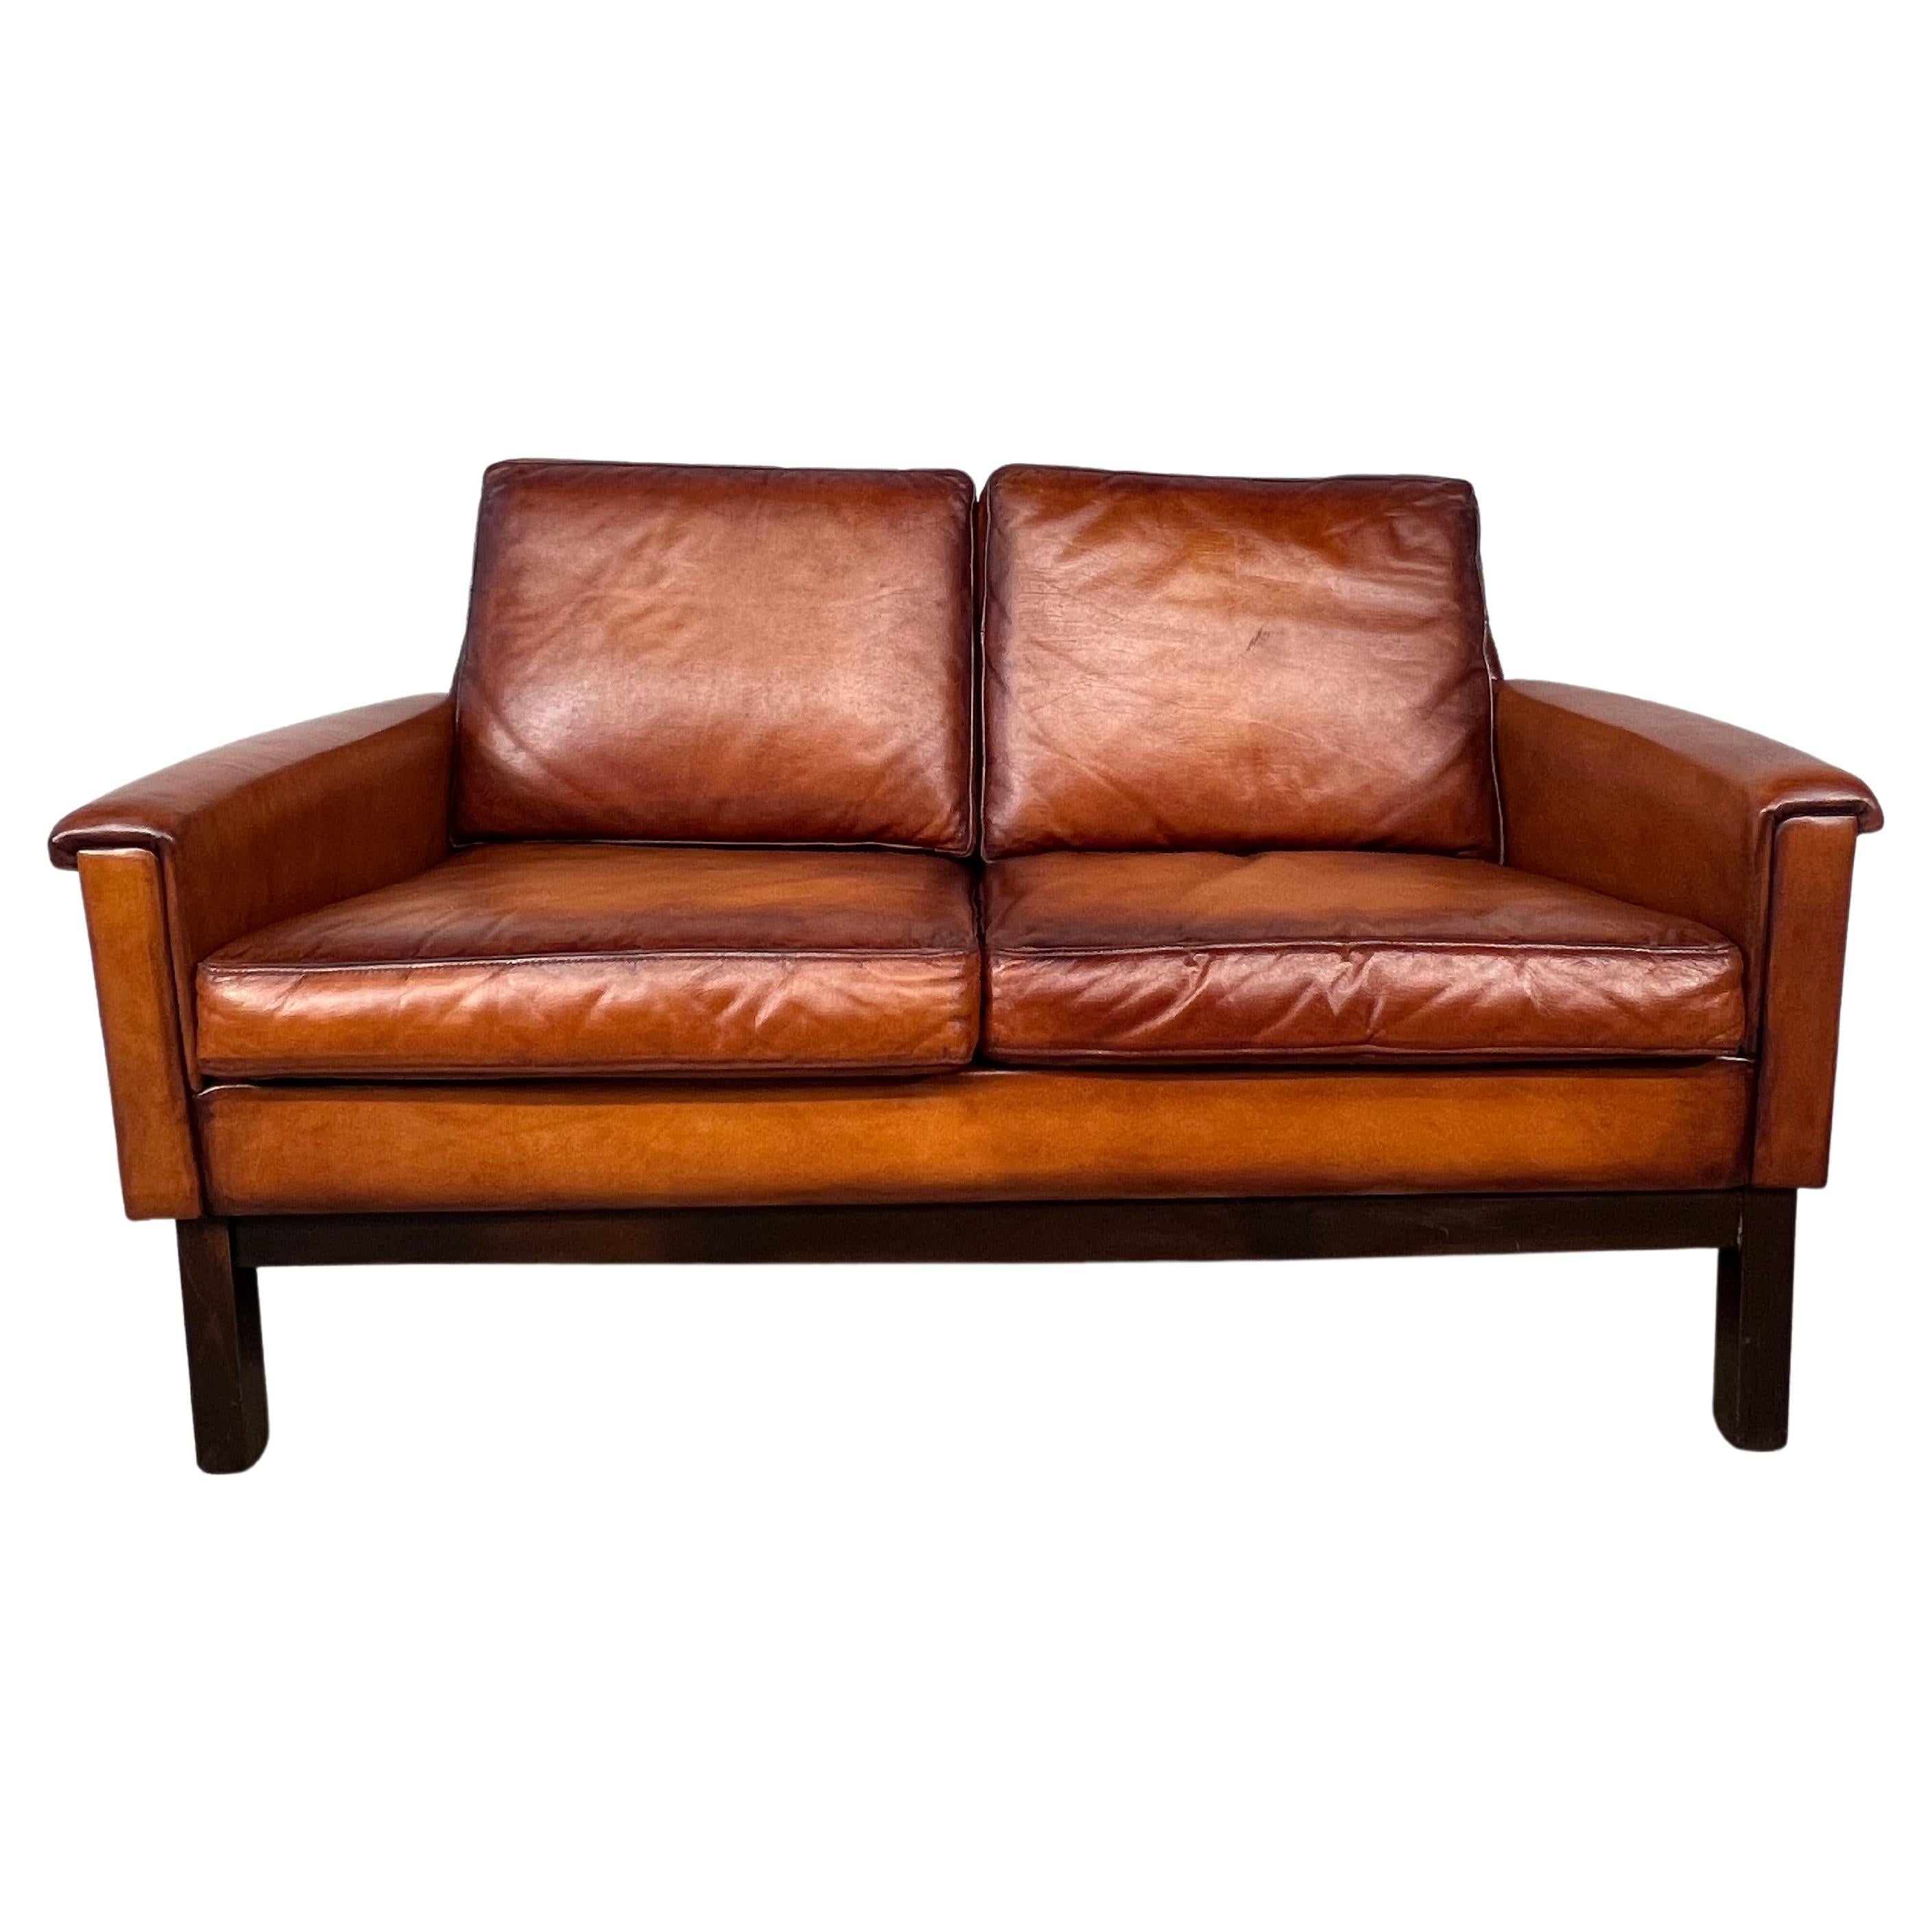 Vintage Danish 70s Mid-Century Light Tan Two Seater Leather Sofa #547 For Sale